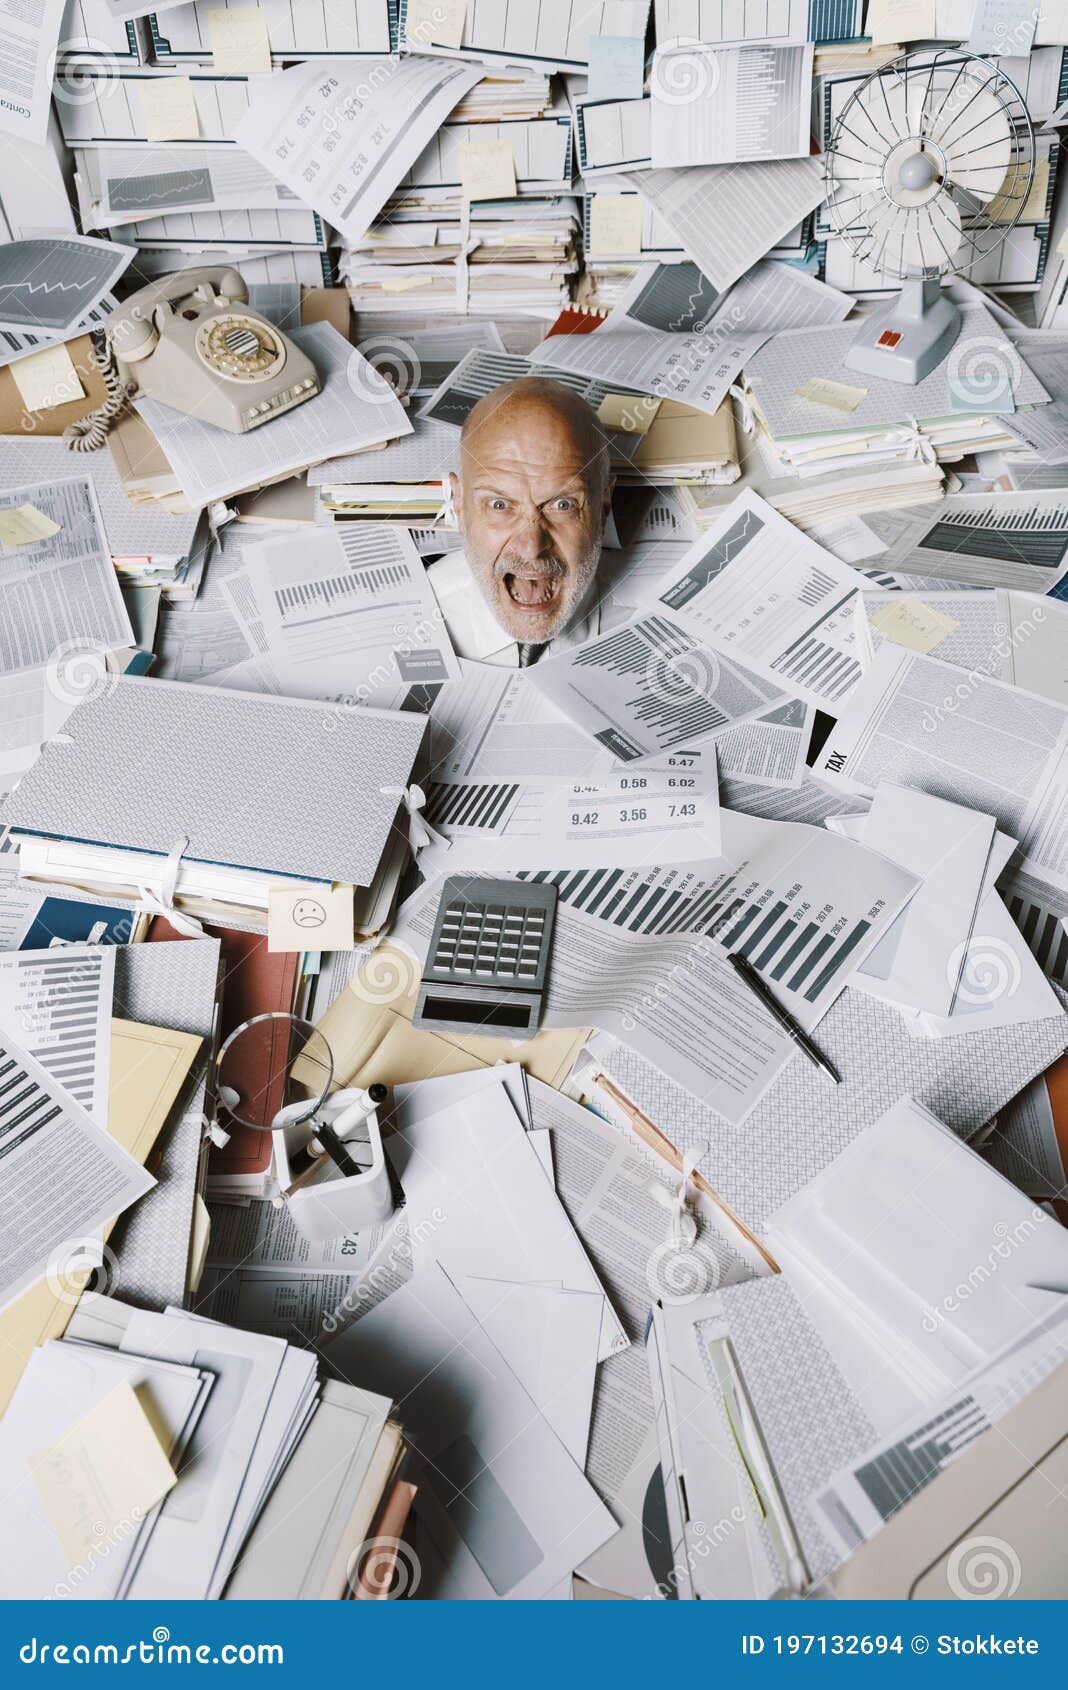 screaming businessman drowning under a lot of paperwork